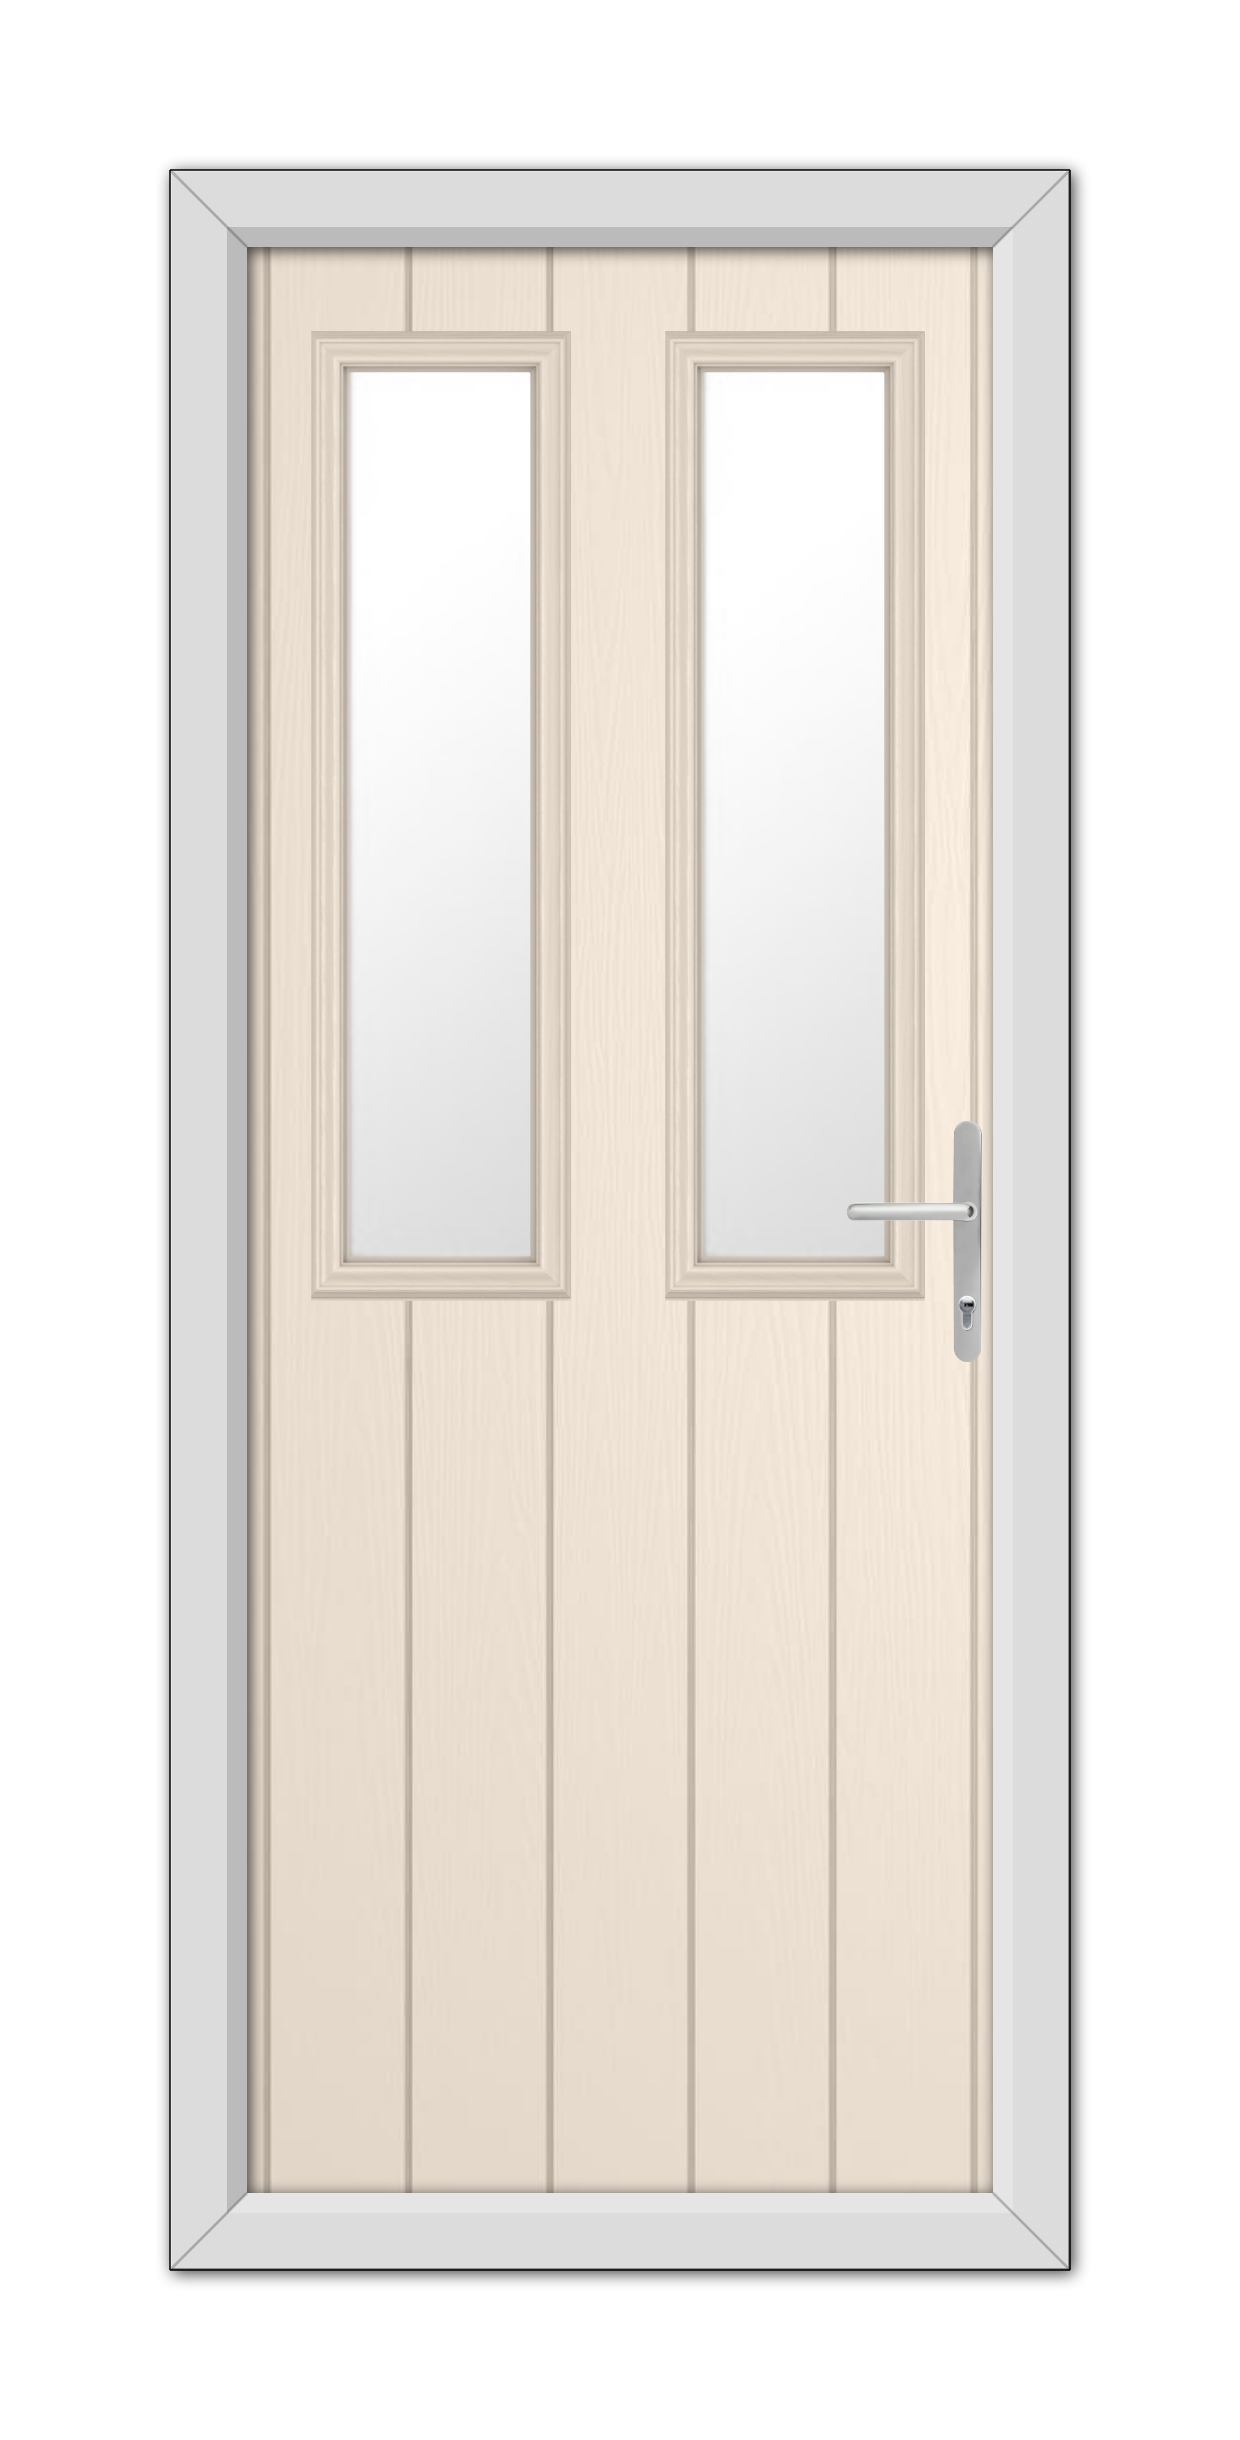 Cream Wellington Composite Door 48mm Timber Core with glass panels and a metal handle, set within a gray frame, isolated on a white background.